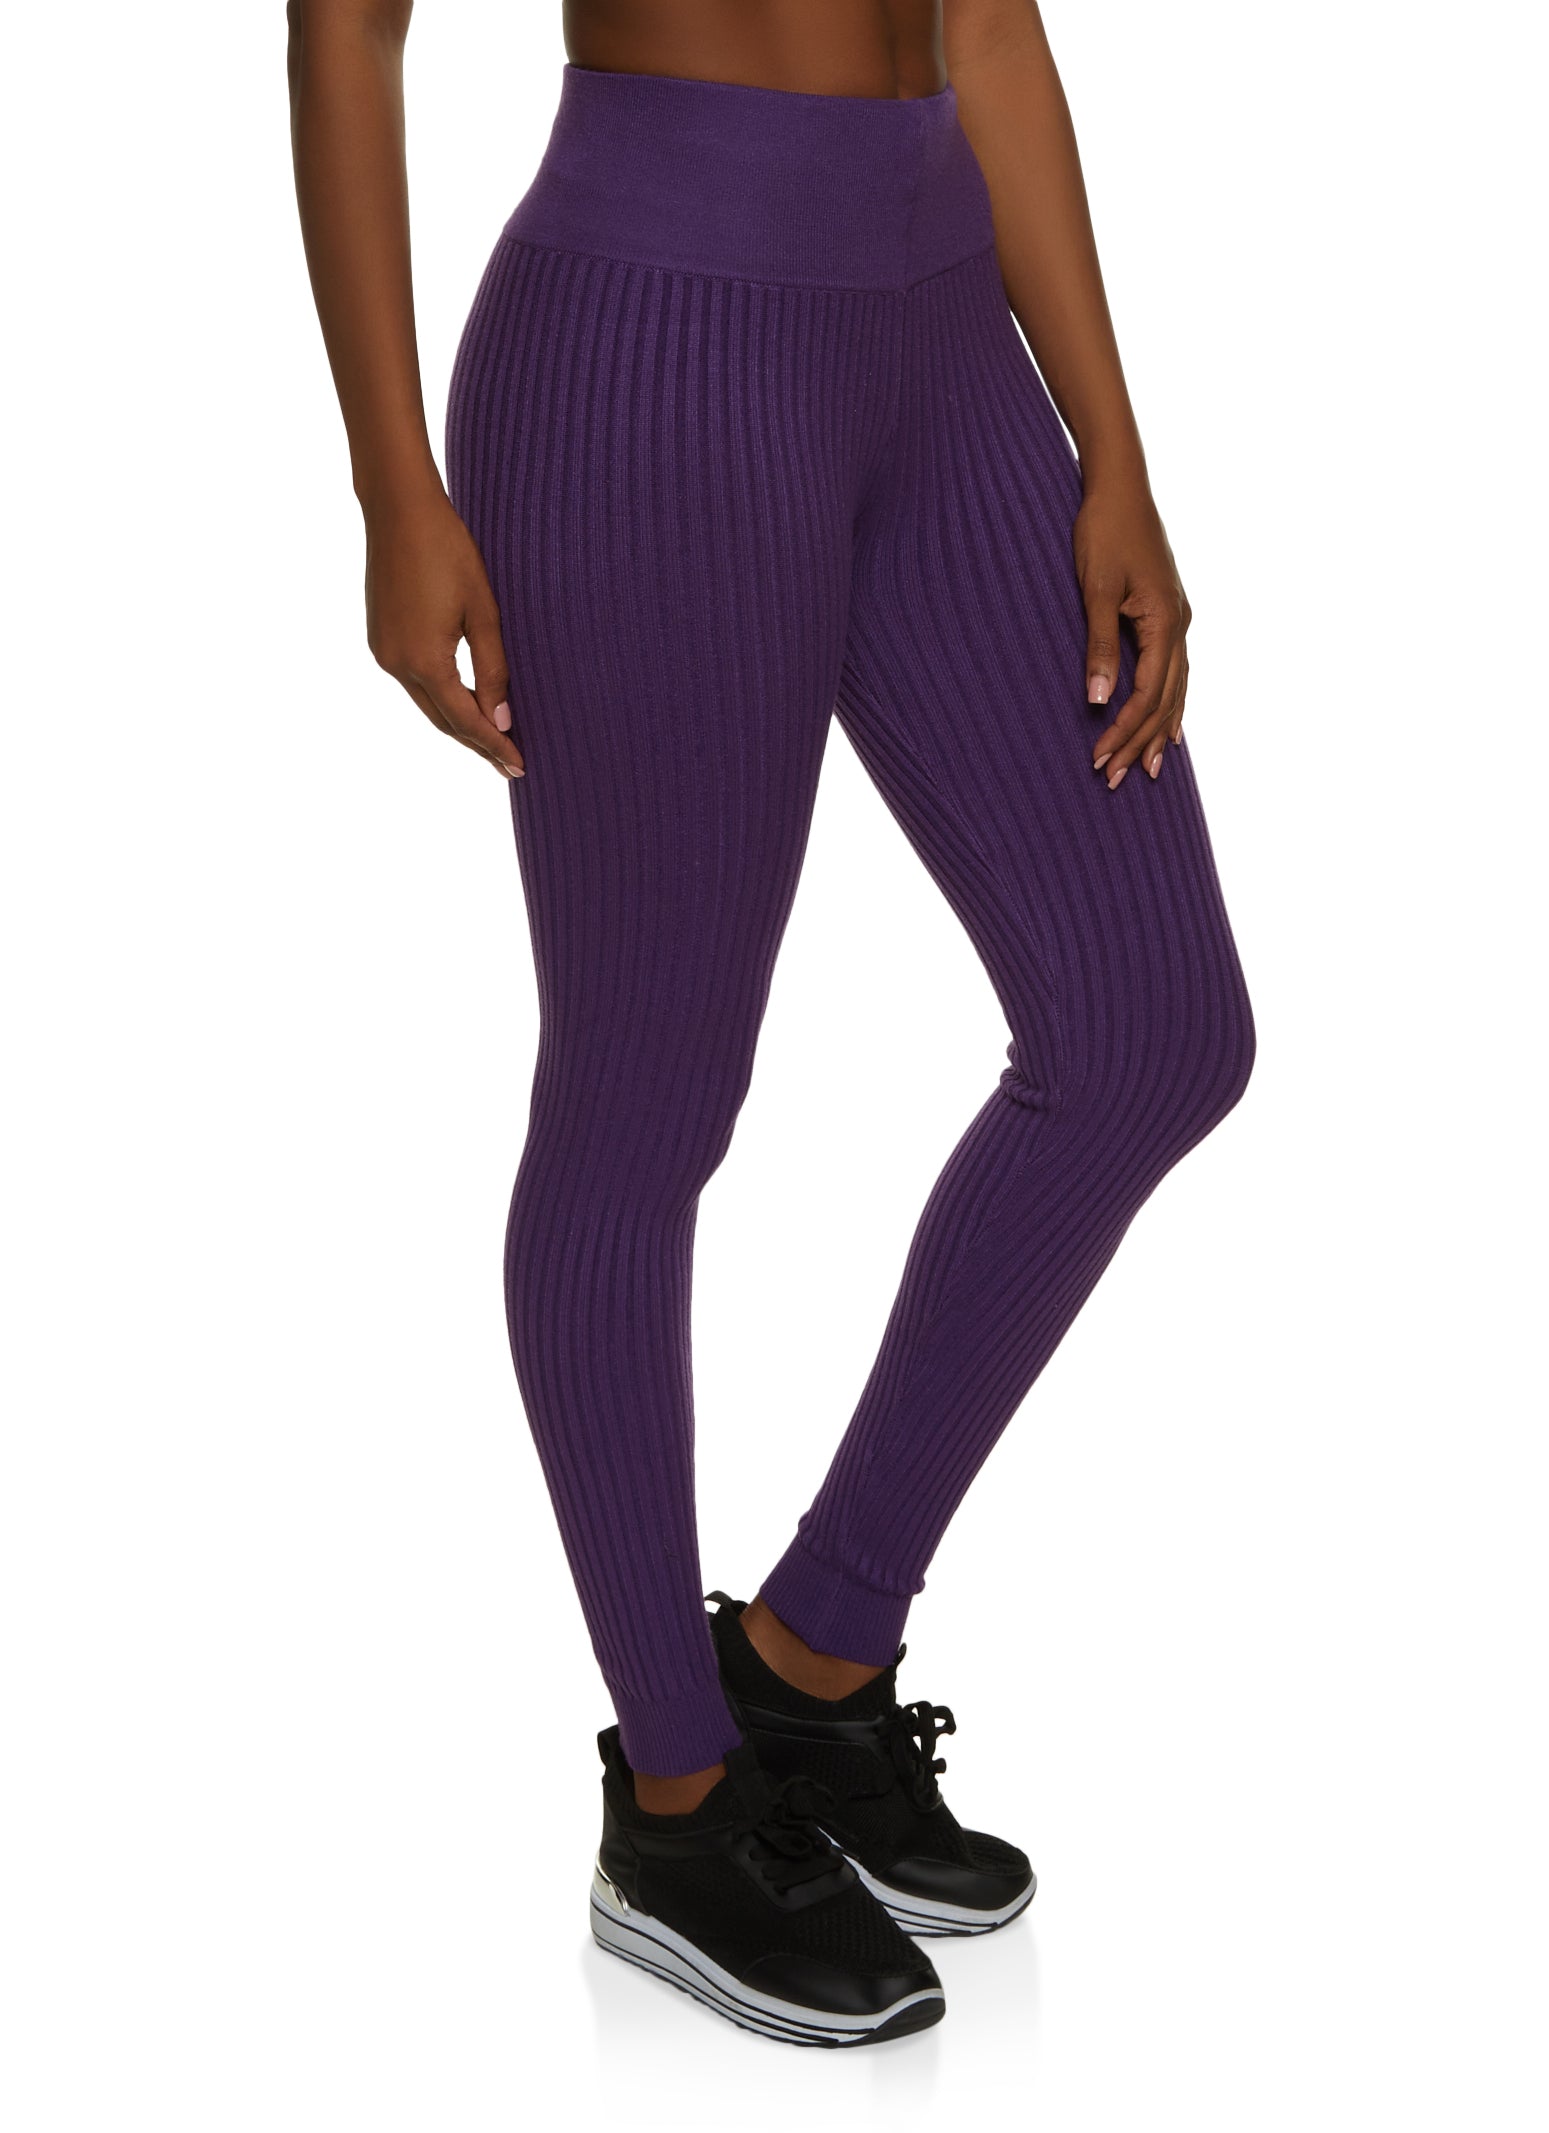 Women's Purple Leggings: Shop for Everyday Bottoms for Any Occasion